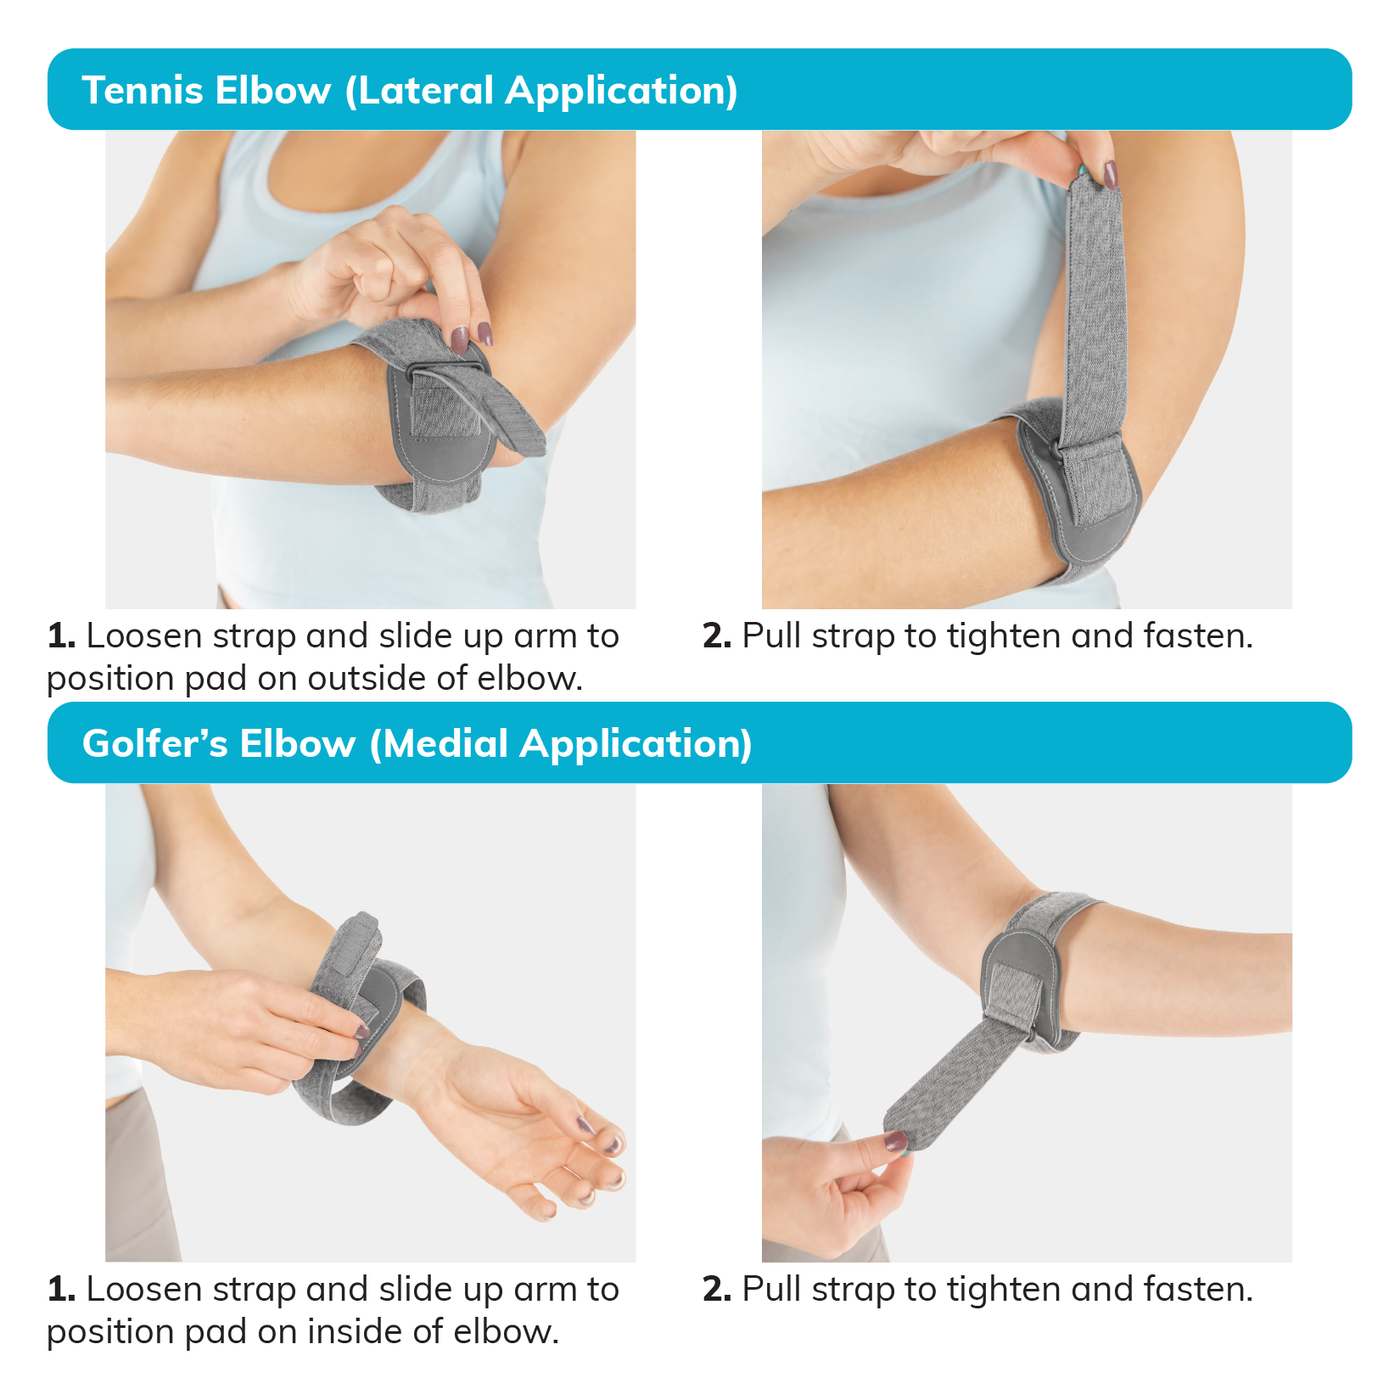 Instruction sheet for how to apply the elbow pain brace, loosen the strap and slide up arm onto elbow. For tennis elbow, position on outside of arm, for golfers elbow, position on inside of arm.